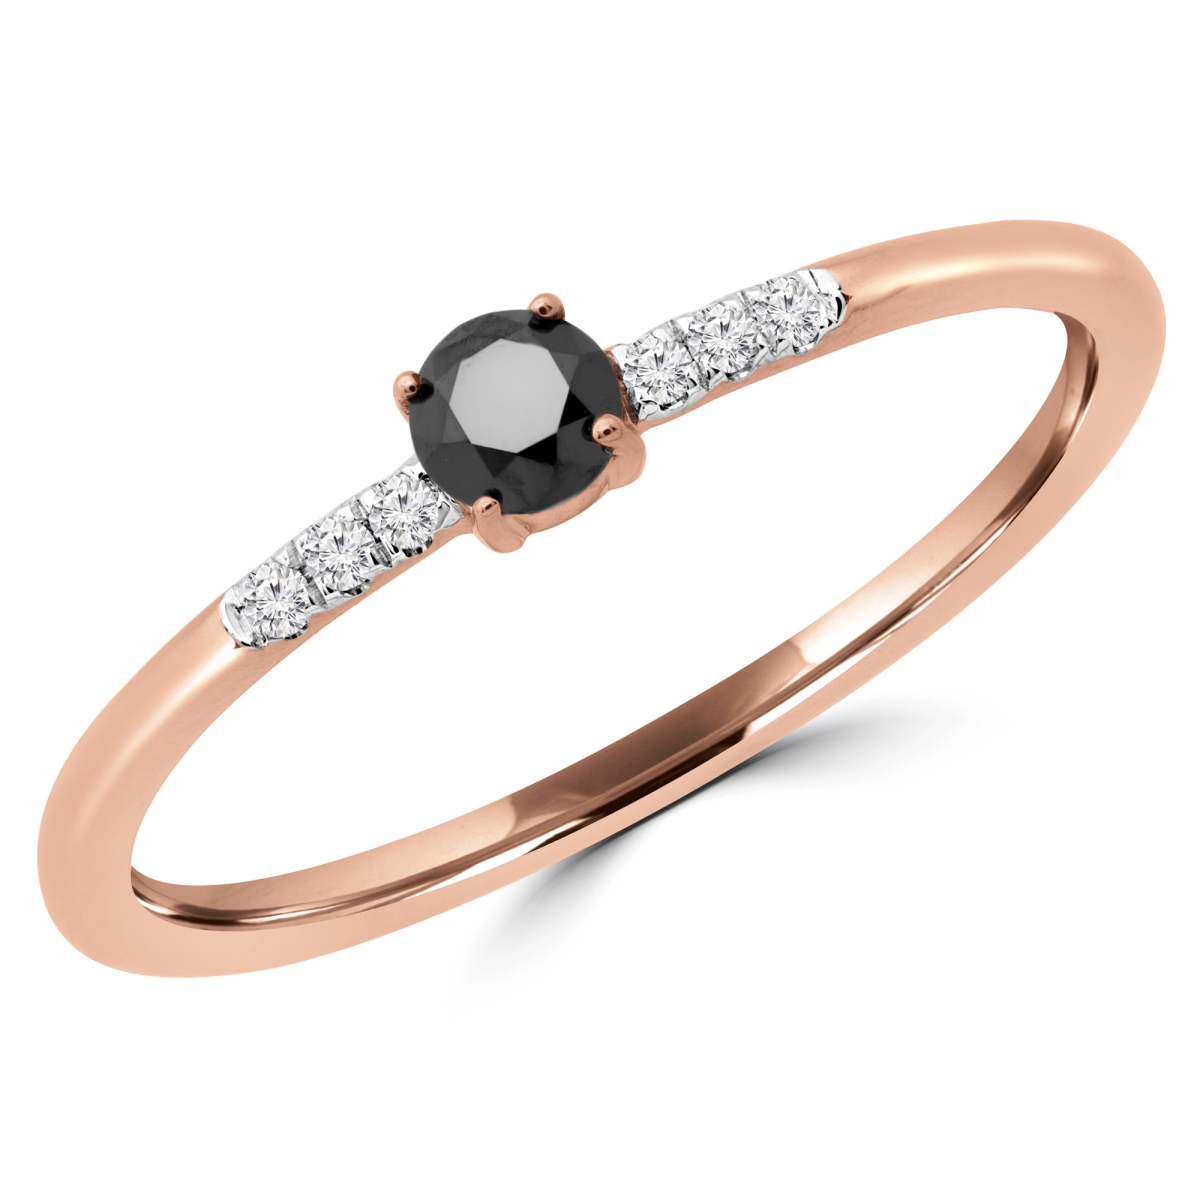 Picture of Majesty Diamonds MDR190079-6.75 0.16 CTW Round Black Diamond Bezel Set Cocktail Ring in 14K Rose Gold - Size 6.75